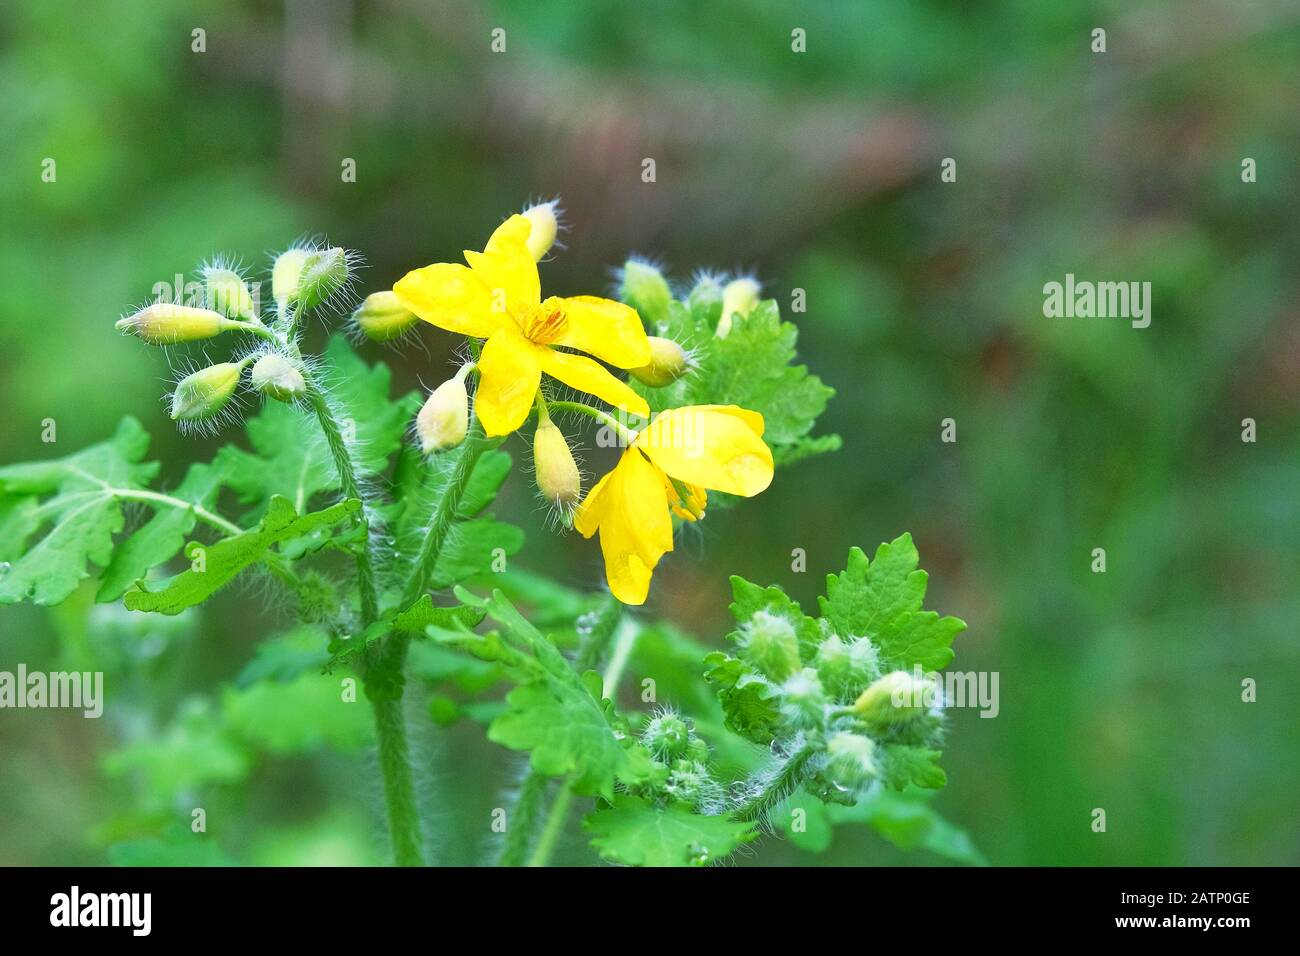 Celandine flowers on green nature blurred background on meadow. Medicinal herb. Yellow flowers for herbal medicine. Stock Photo